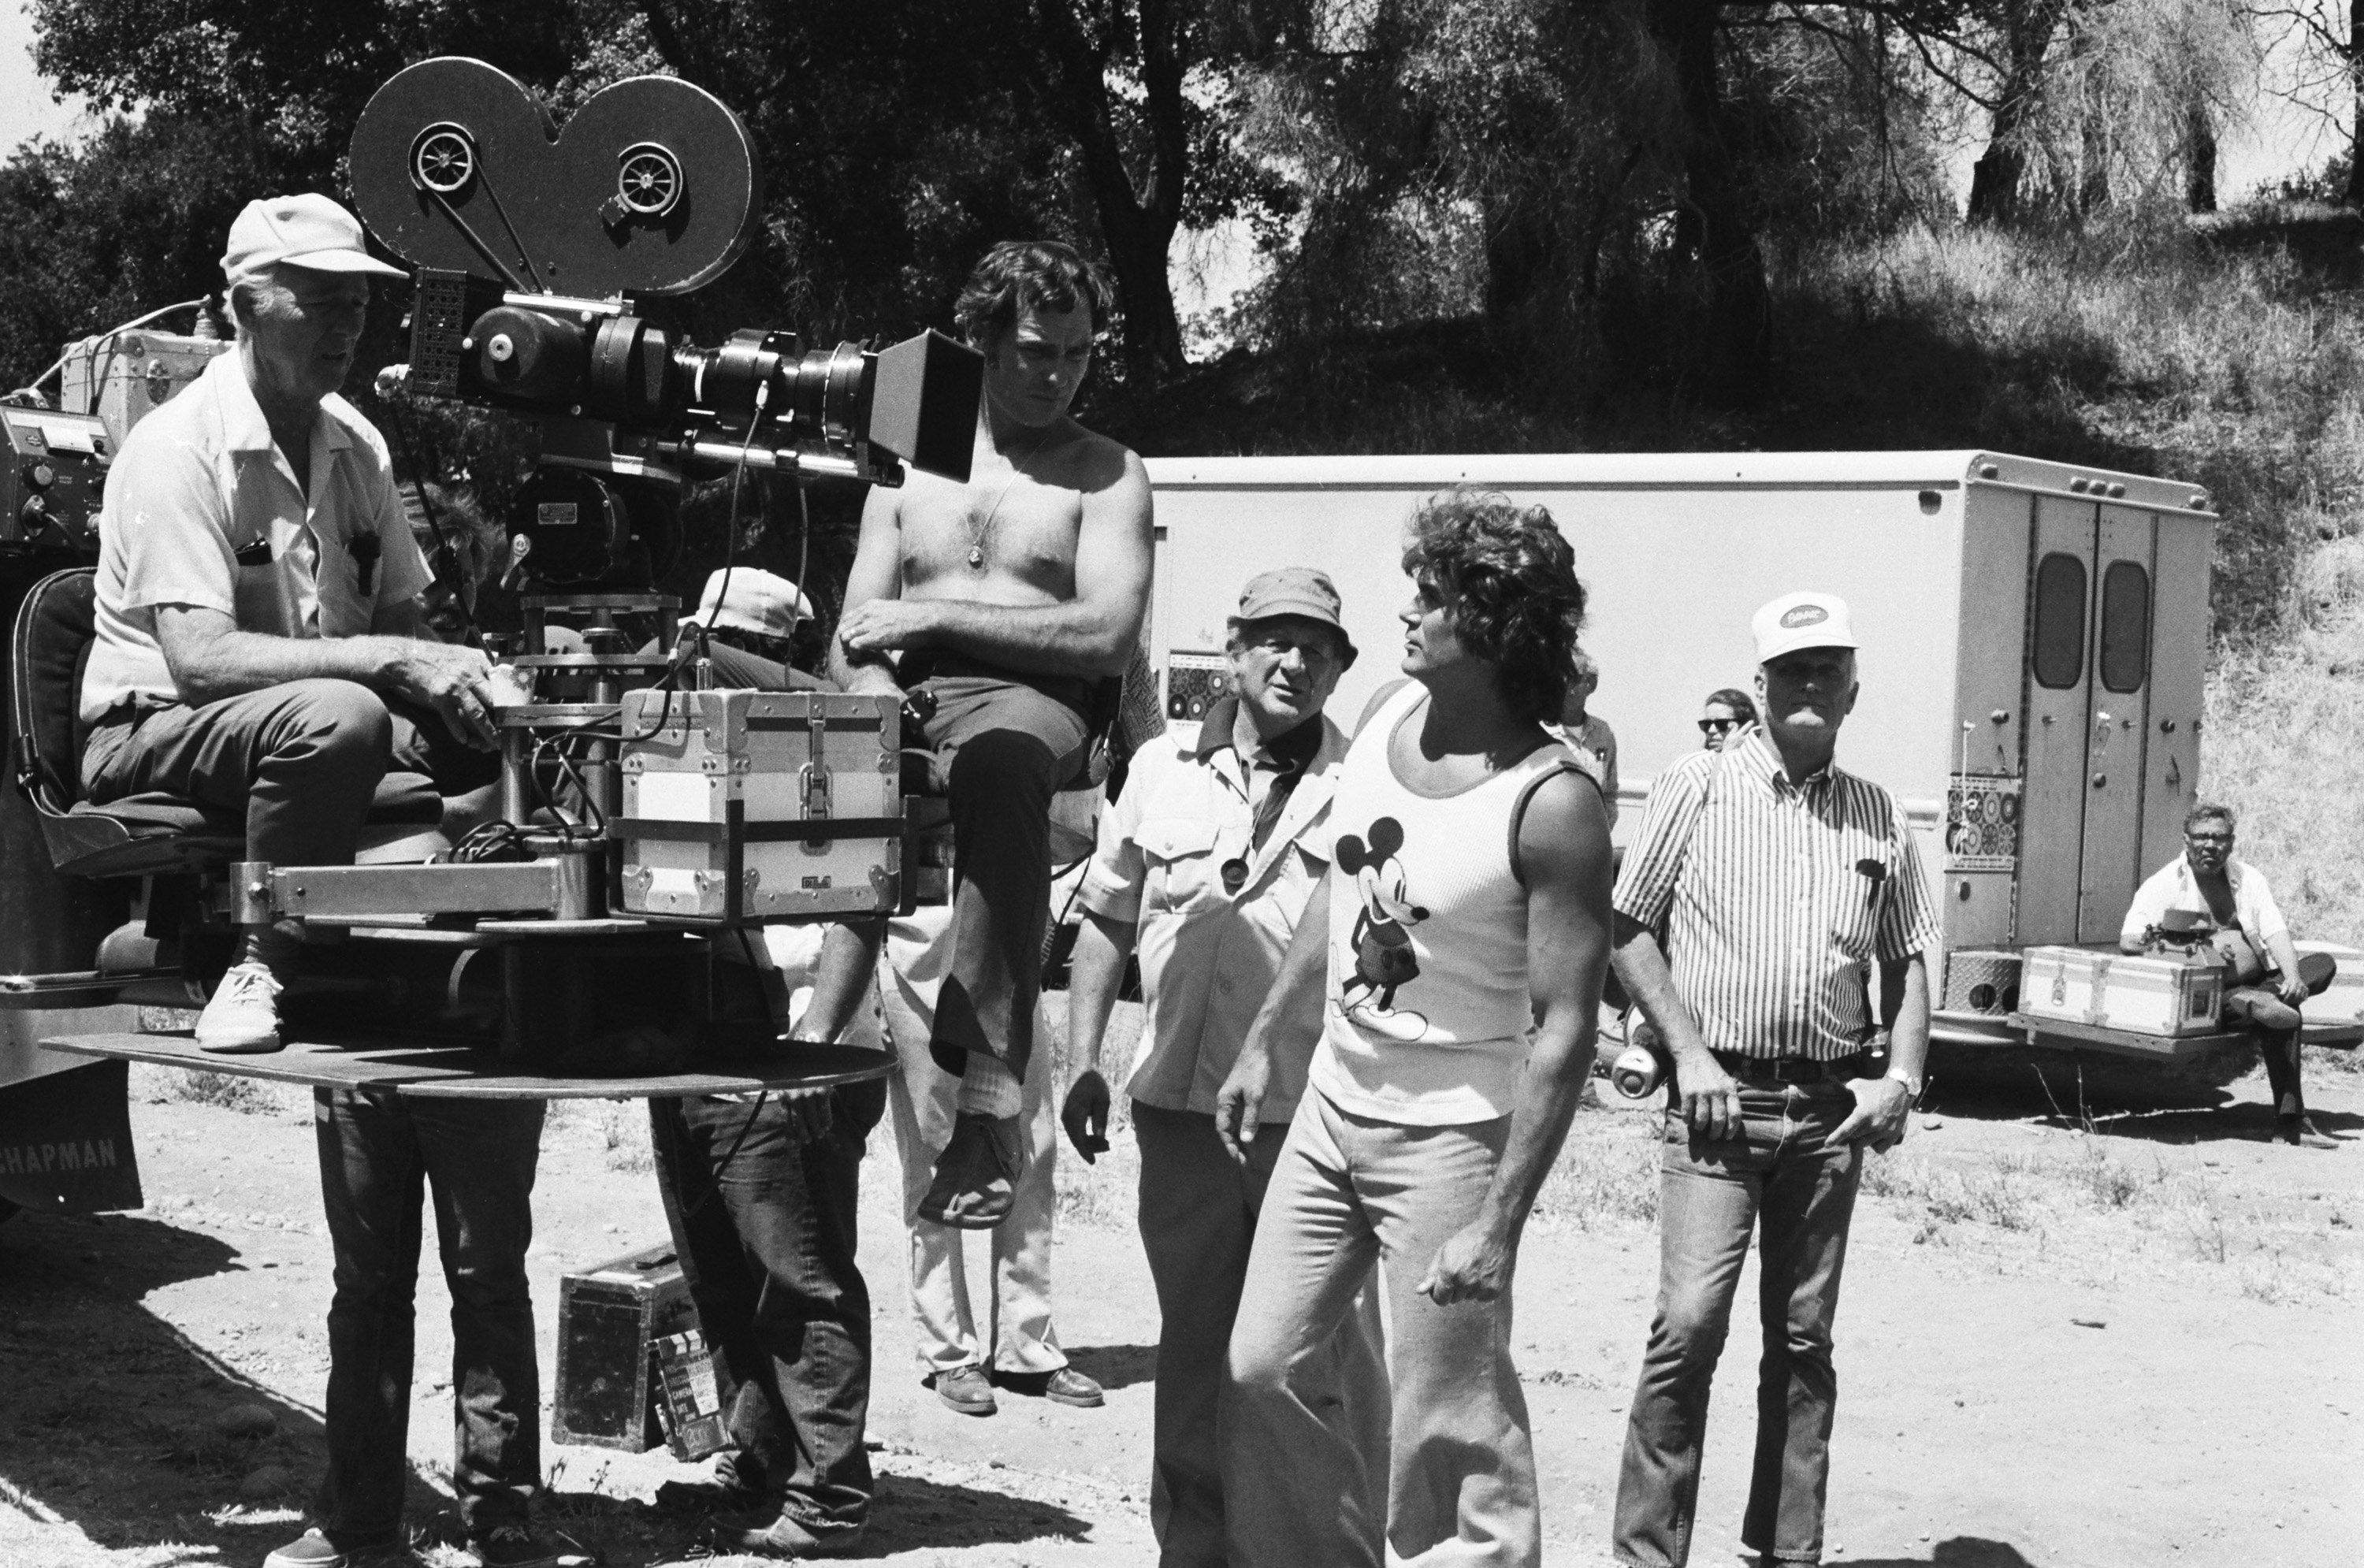 Pictured: Director Michael Landon in a white undershirt photographed with crew members on the set of " Little House on the Prairie," on December 10, 1975. | Source: Getty Images